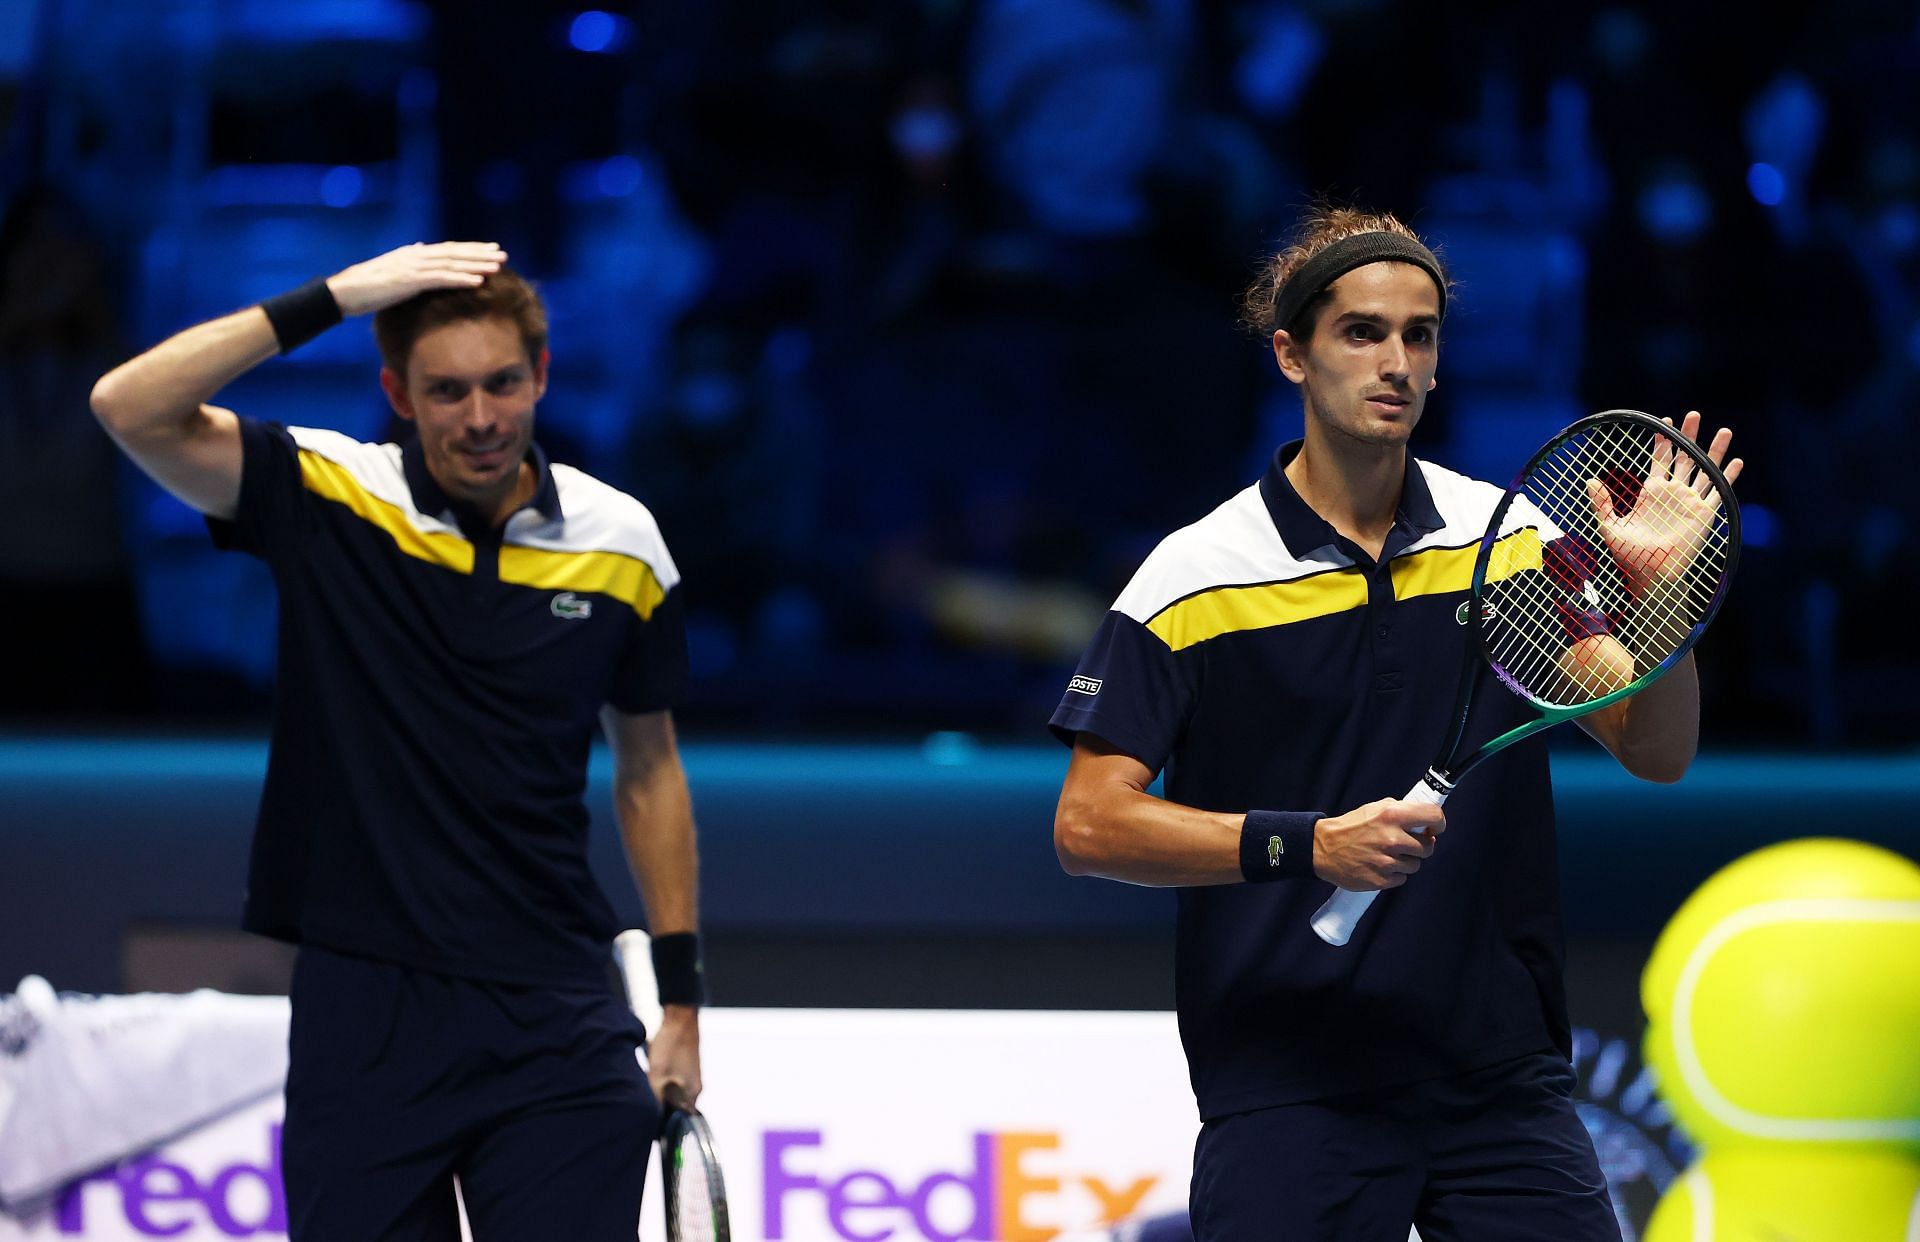 Nicolas Mahut (L) and Pierre-Hugues Herbert (R) at the 2021 Nitto ATP World Tour Finals